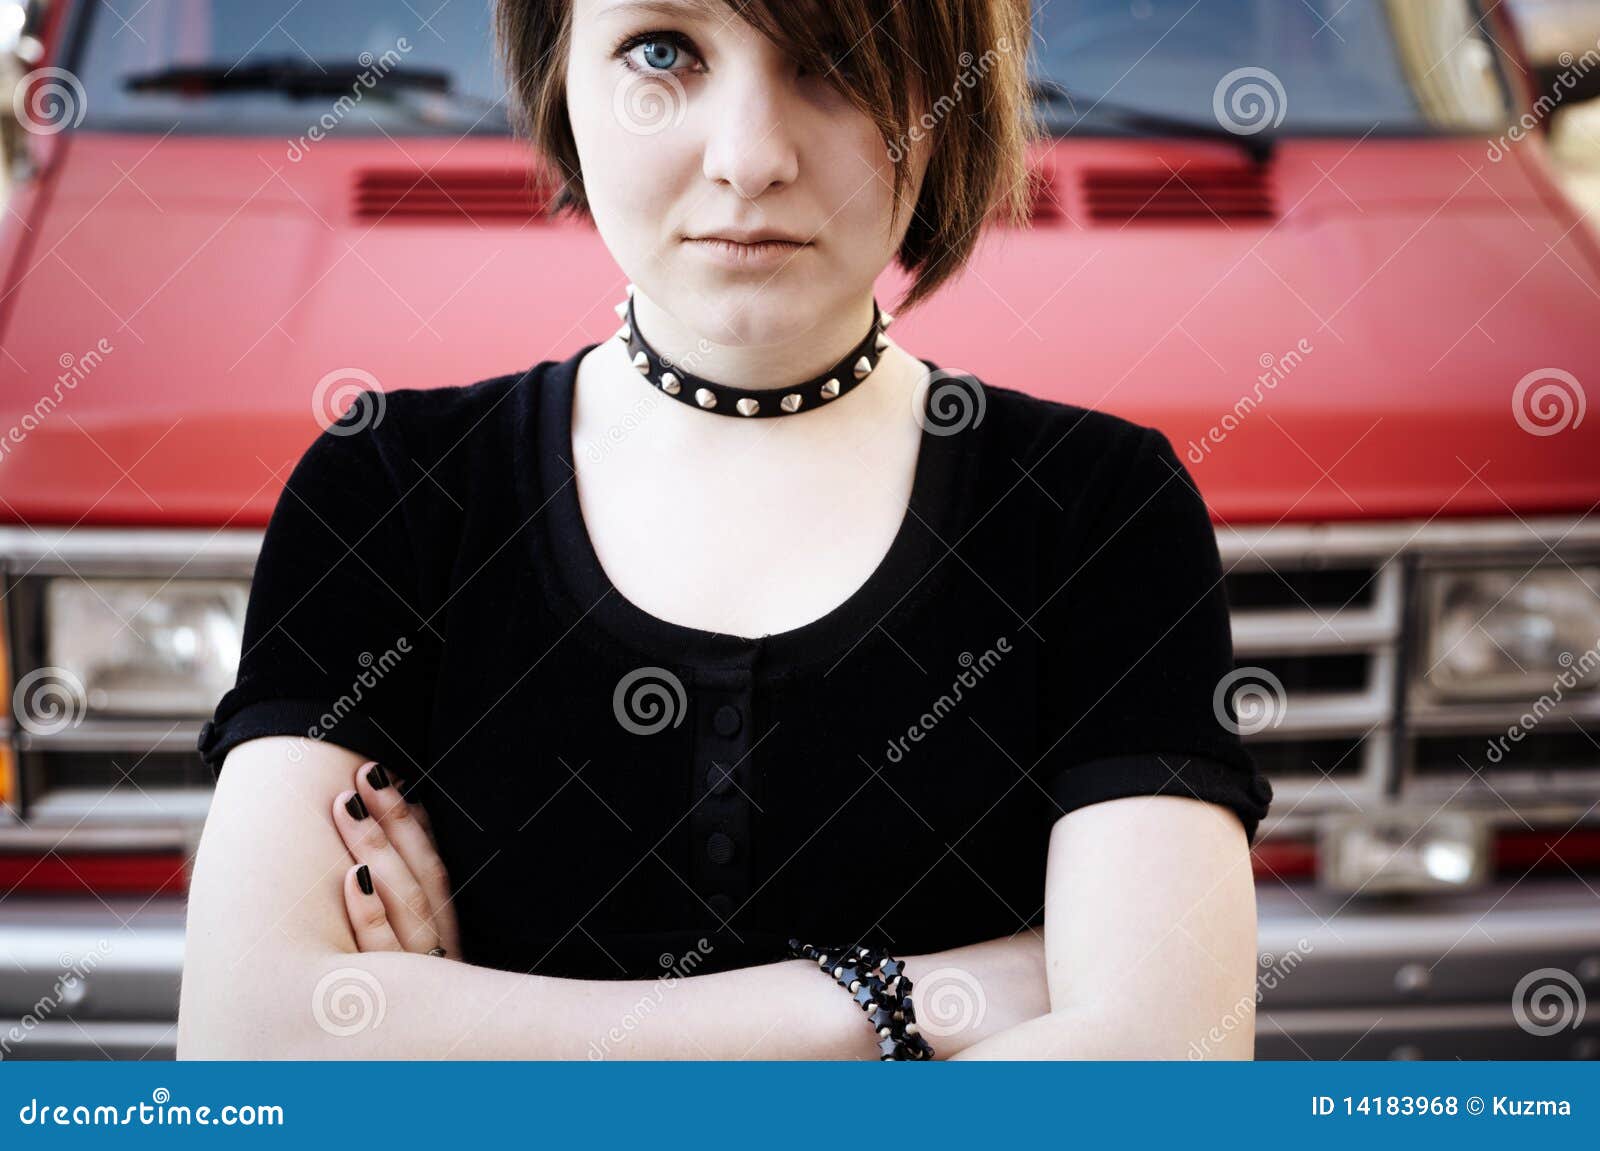 Gothic Teen Stock Photo Image Of Loneliness Front Collar 141